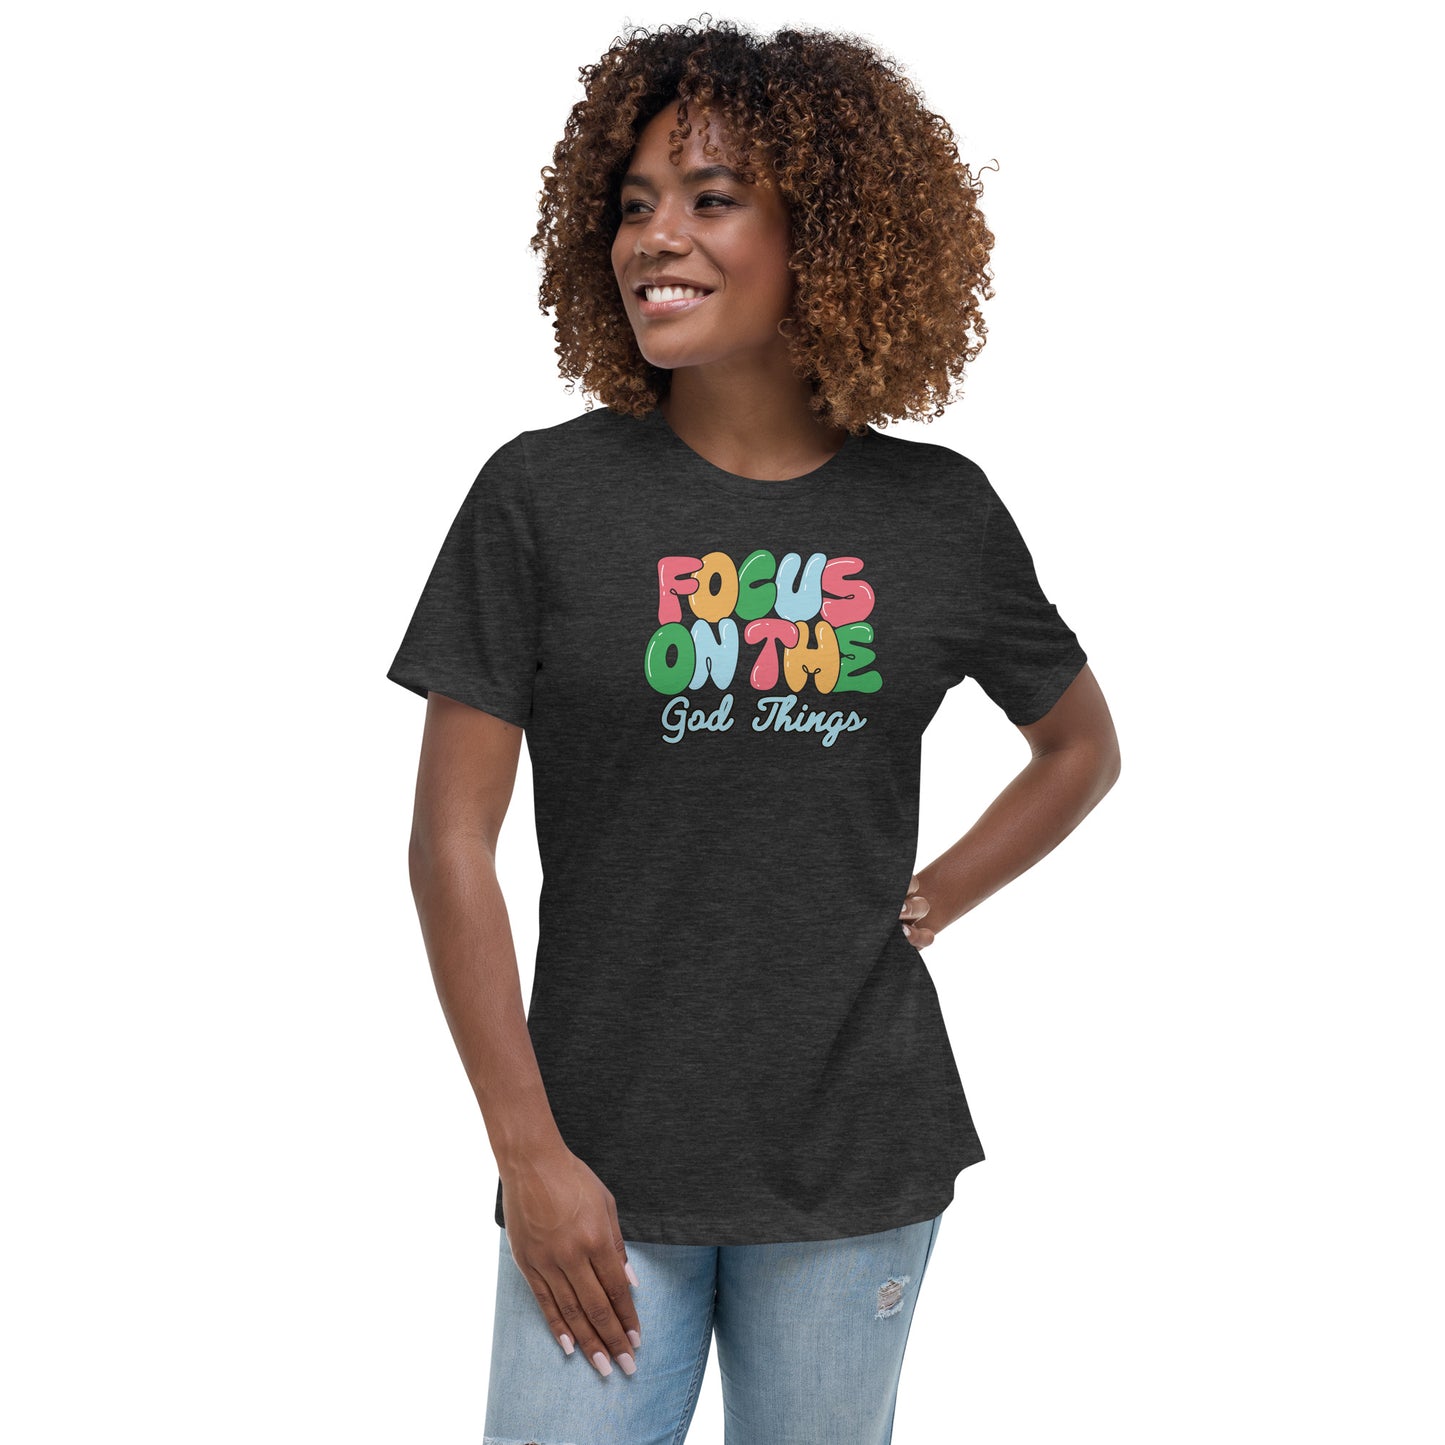 Focus on the God Things Women's Relaxed T-Shirt